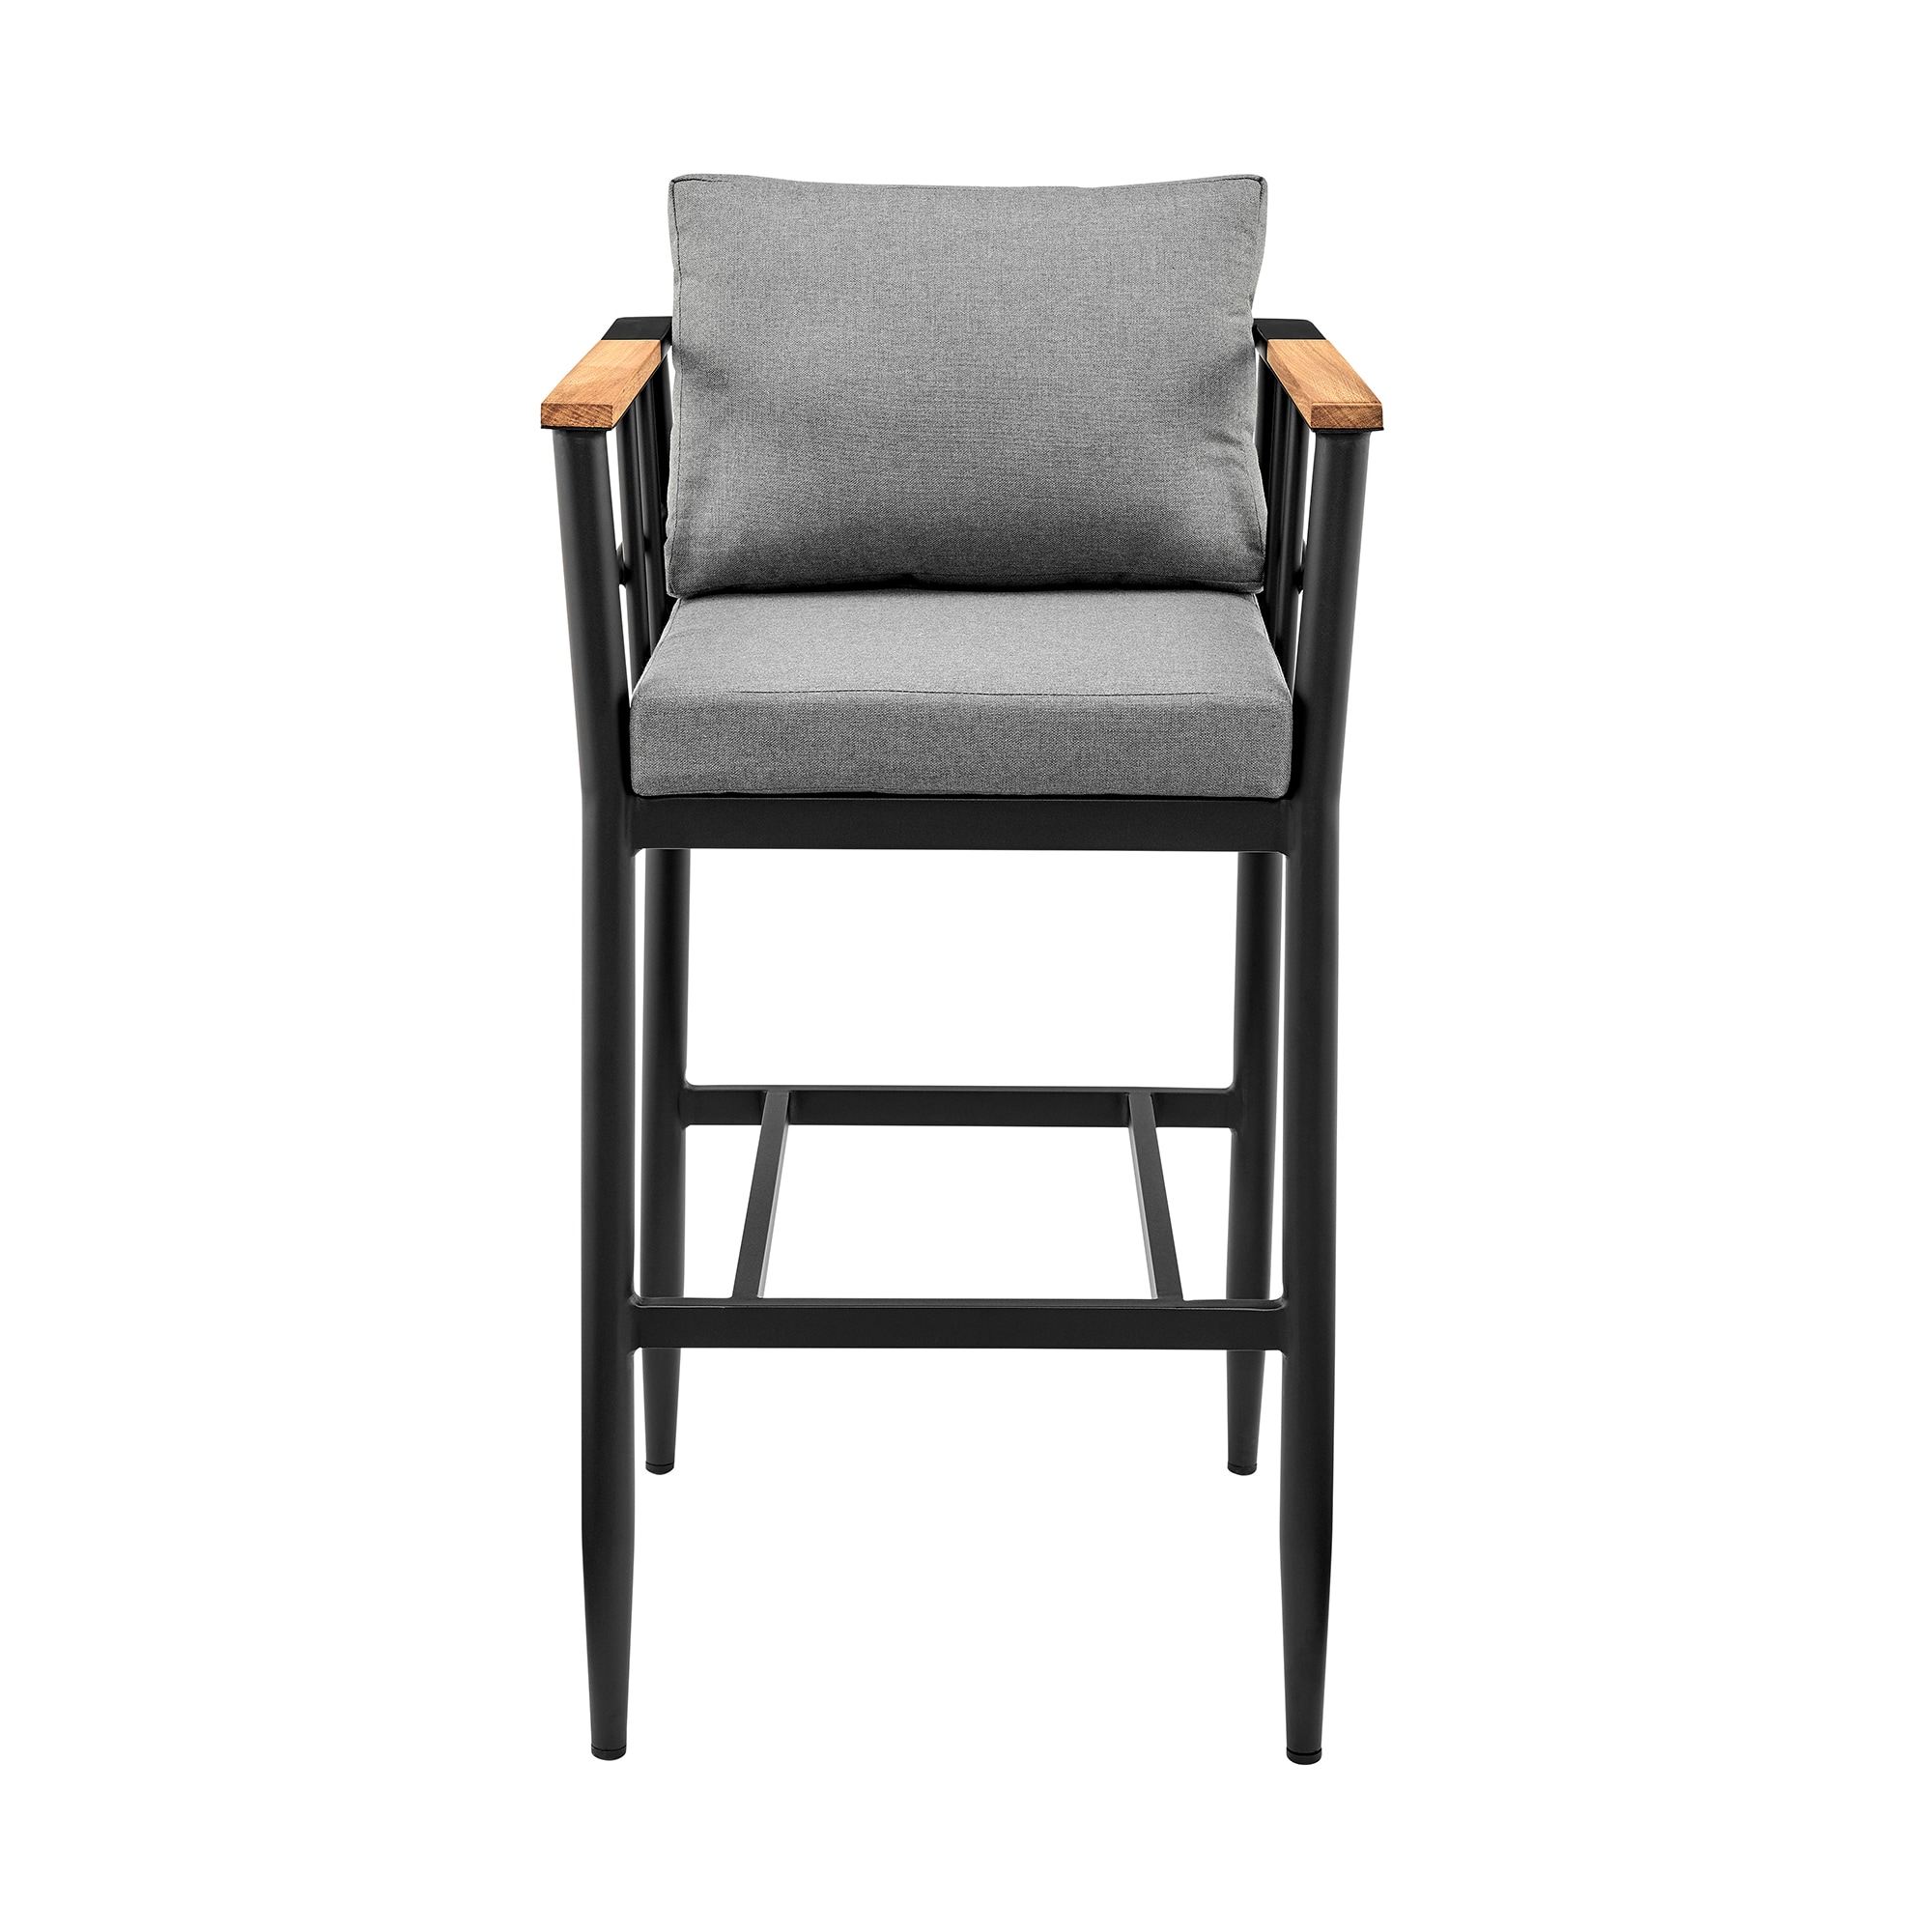 Wiglaf Outdoor Patio Bar Stool in Aluminum and Teak with Gray Cushions